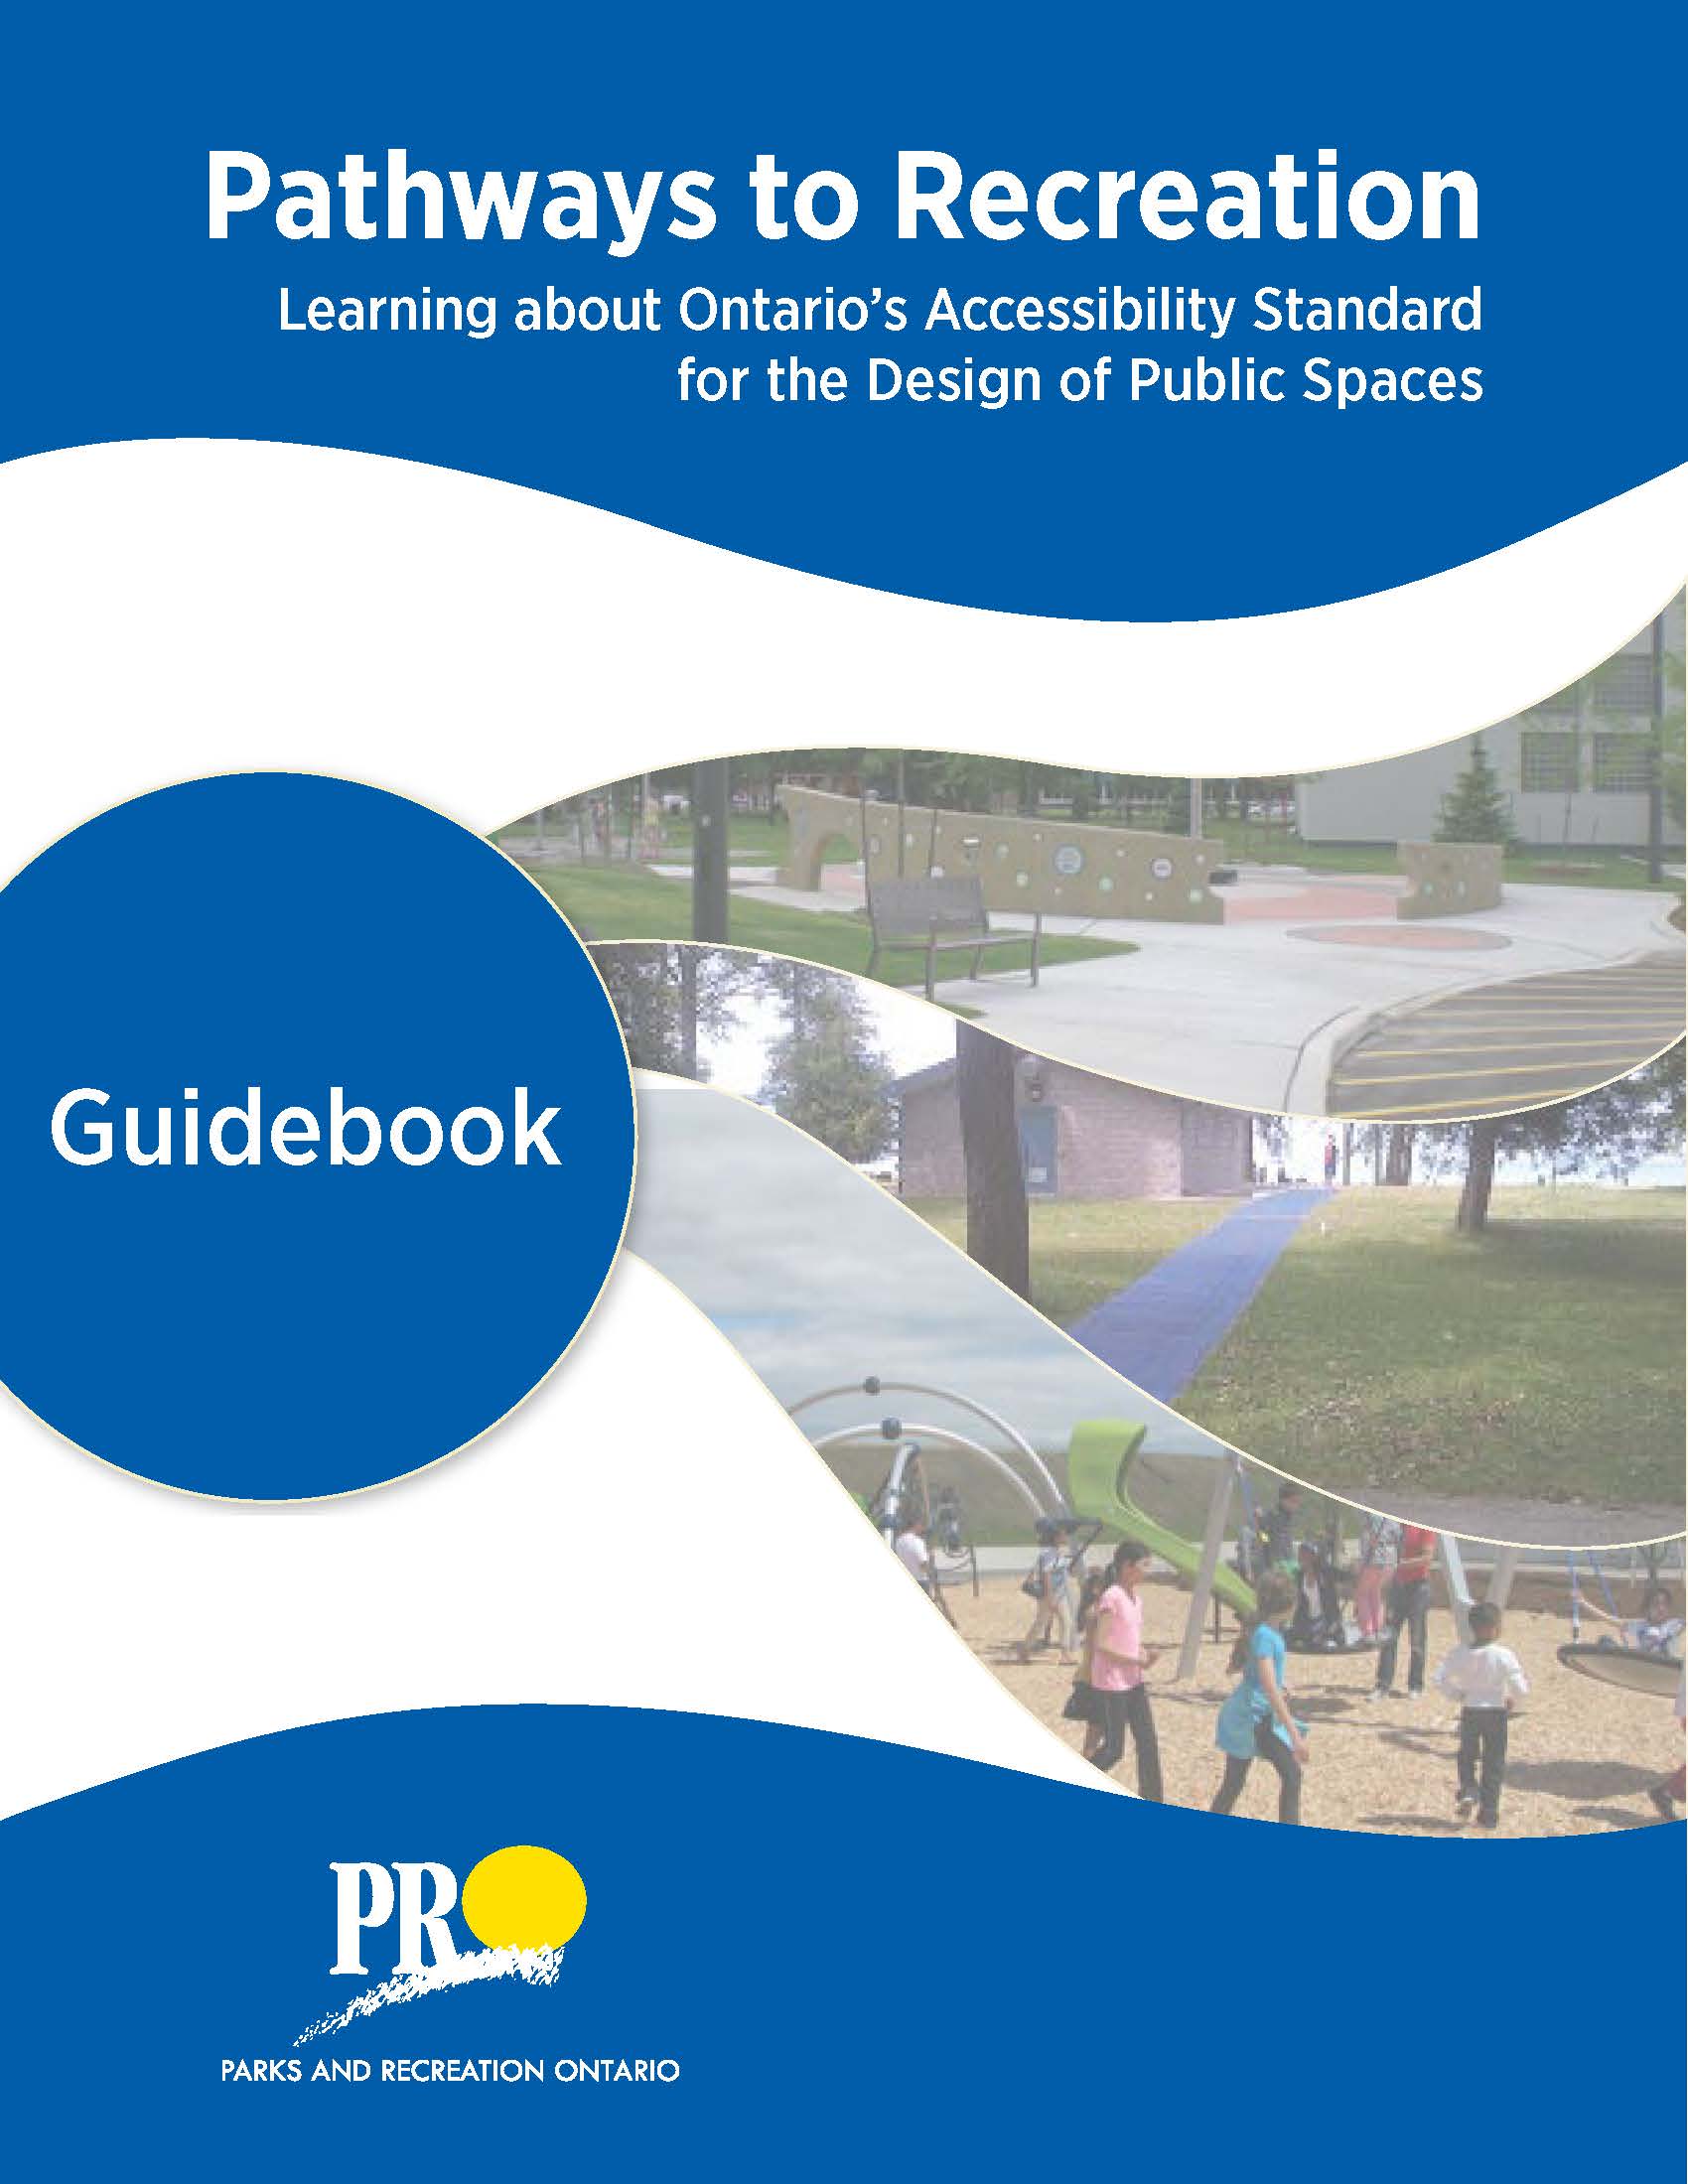 Pathways to Recreation: Learning About Ontario's Accessibility Standard for the Design of Public Spaces